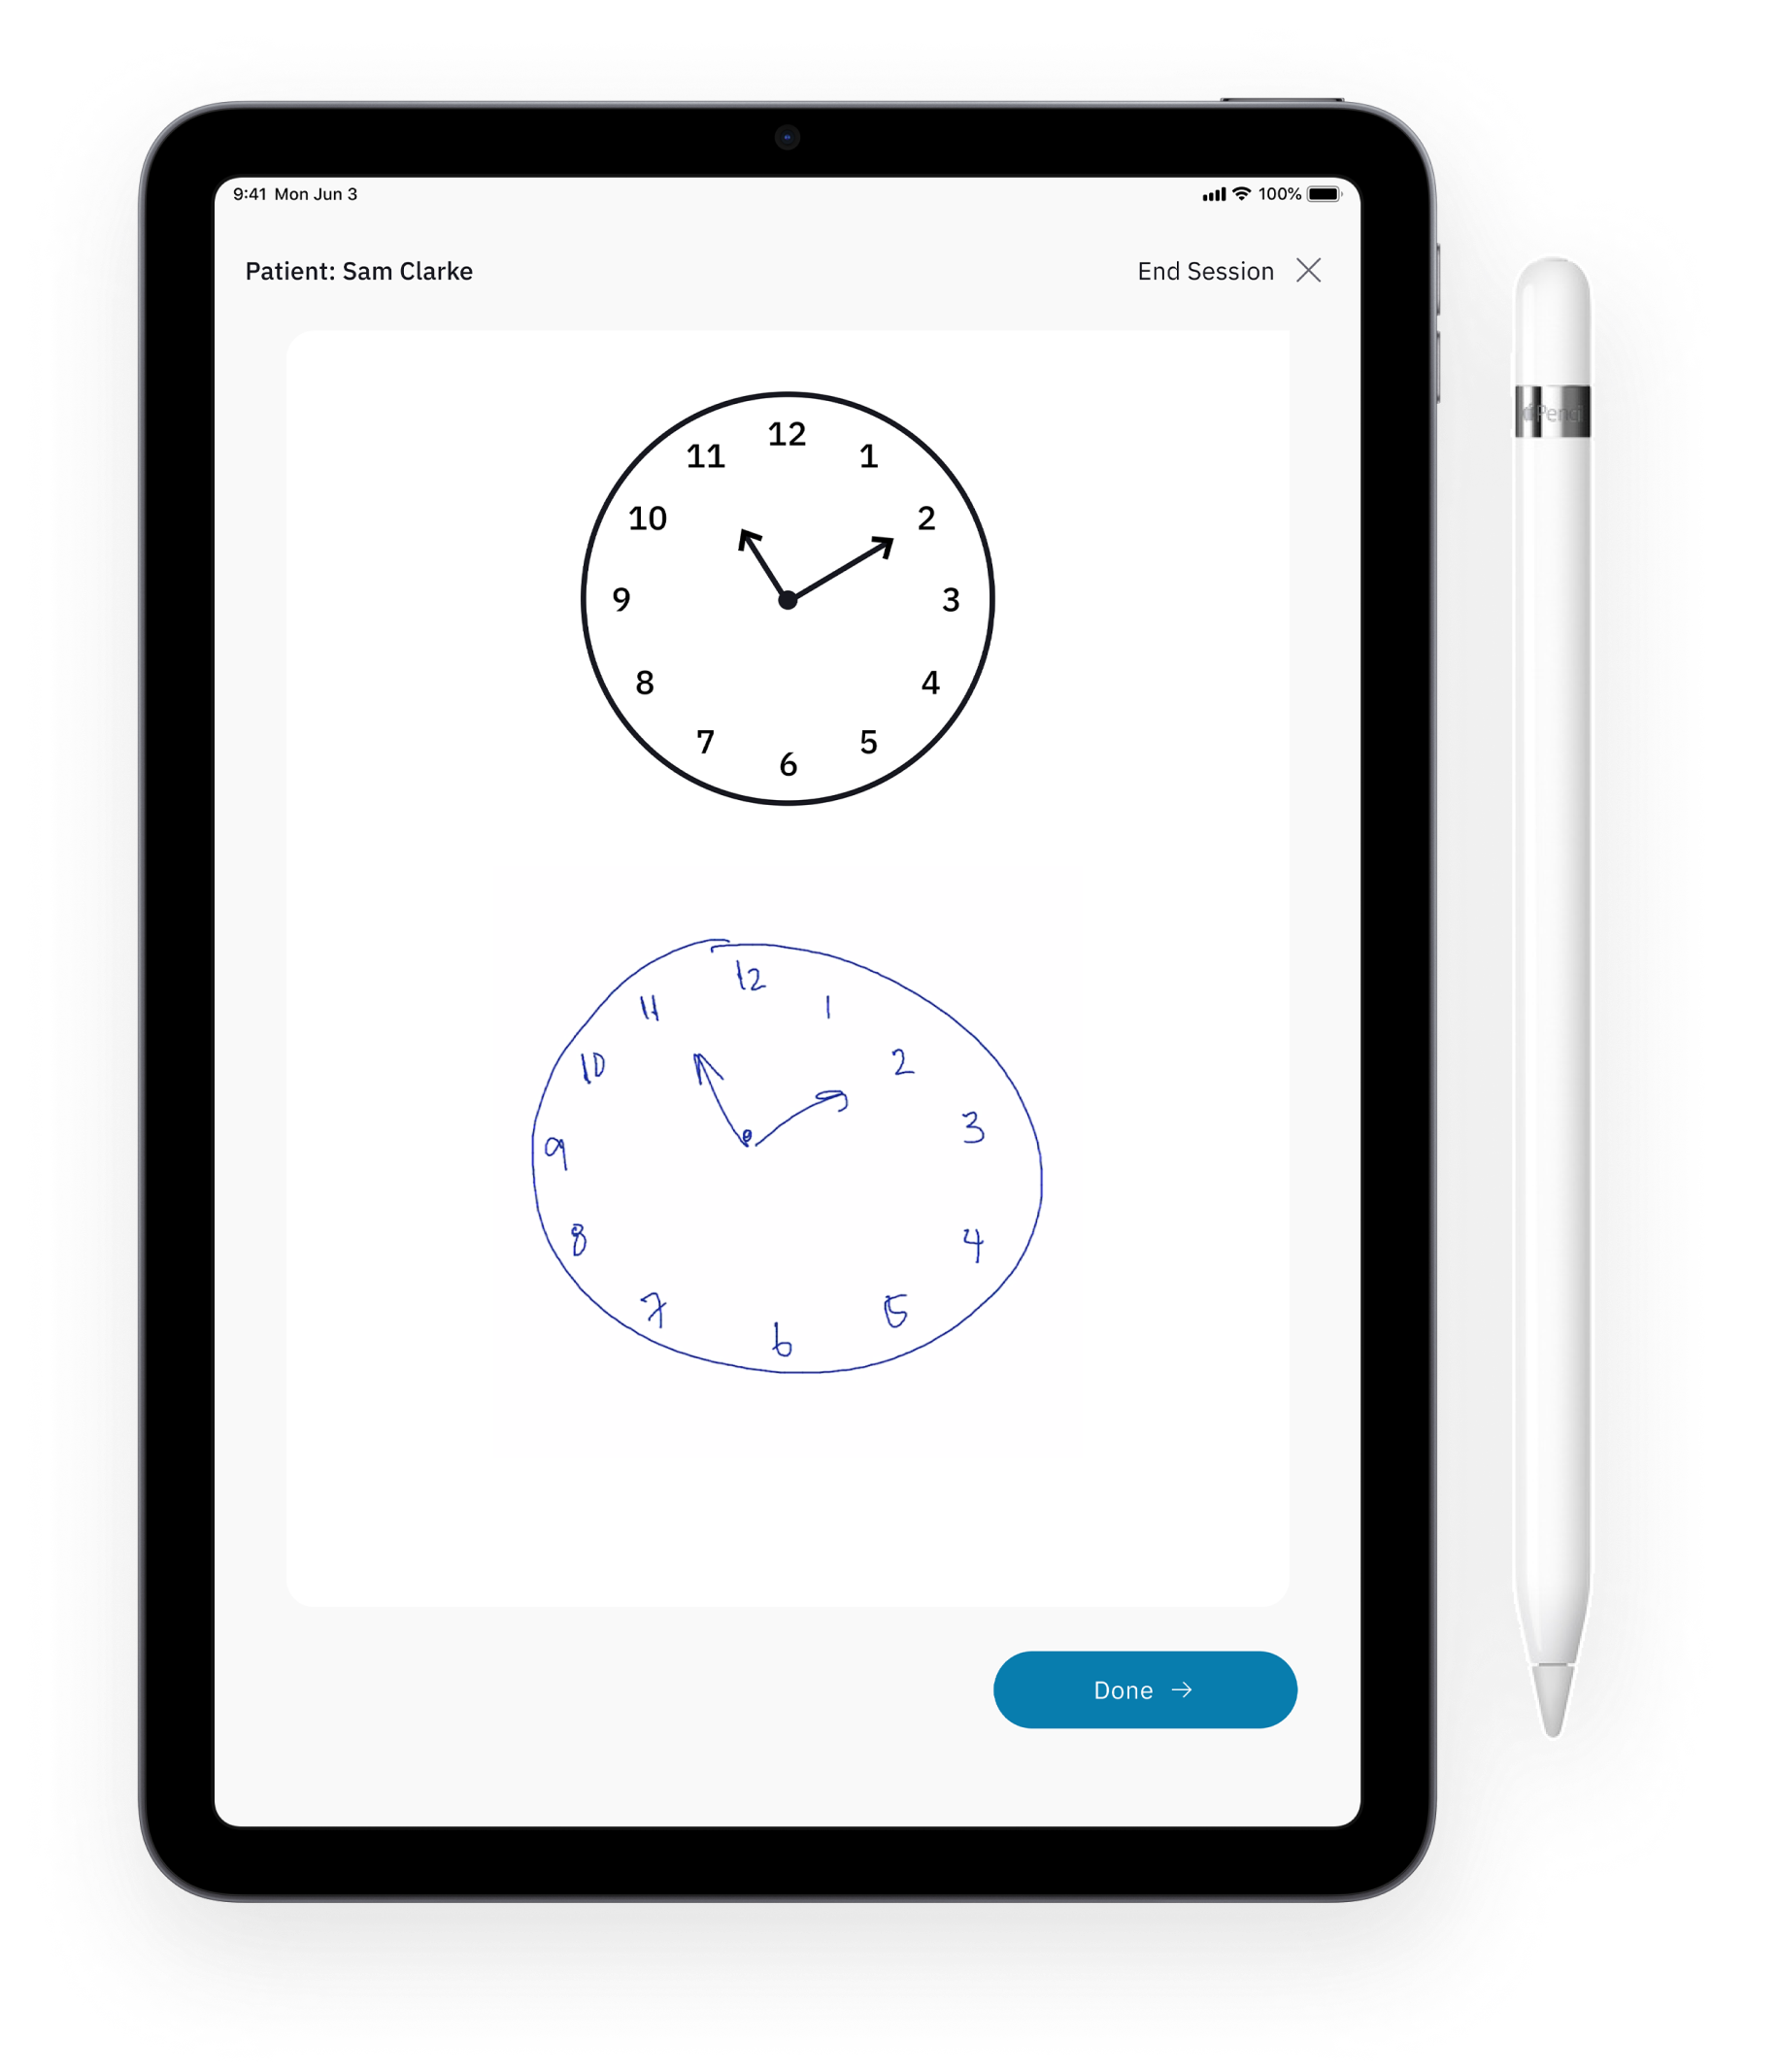 iPad showing the digital clock drawing test for Alzheimers and other dementias. This advanced cognitive test builds upon the scientifically validated traditional cognitive test but combining the clock drawing test with word recall tasks. This cognitive assessment platform integrates with modern EHR systems and can detect early signs of Alzheimers and other dementias